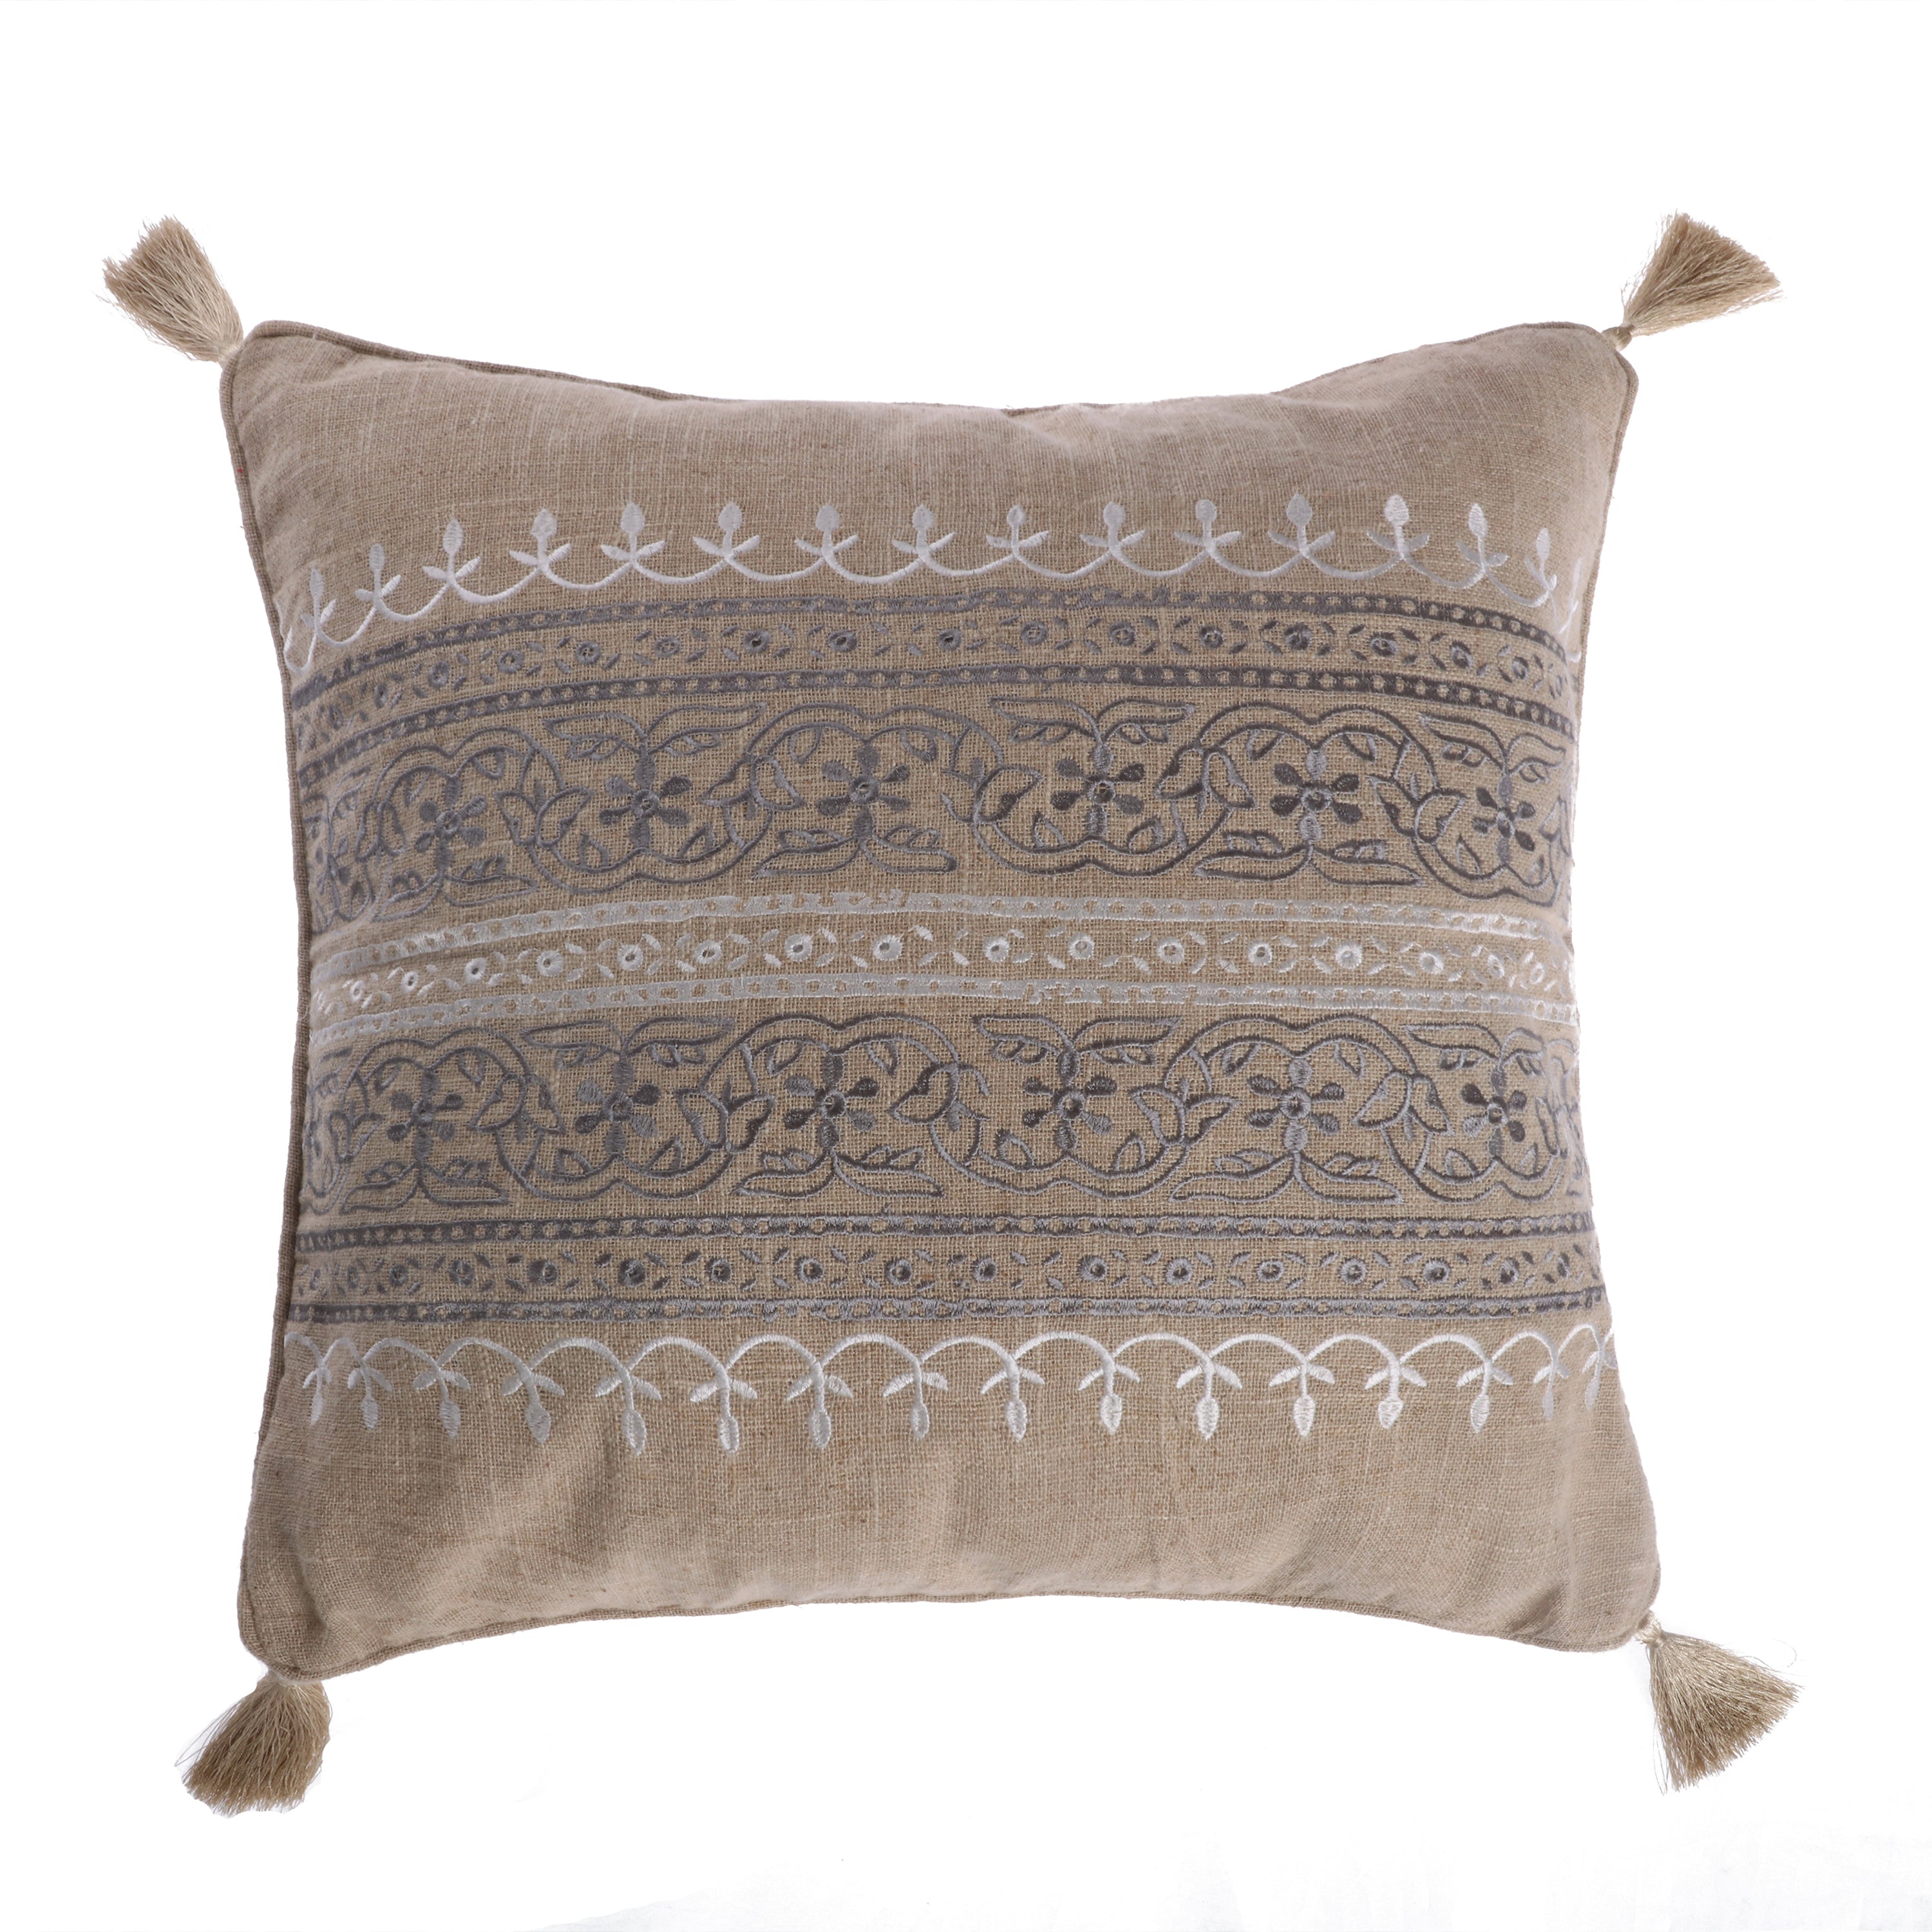 Trevino Embroidered Burlap Pillow